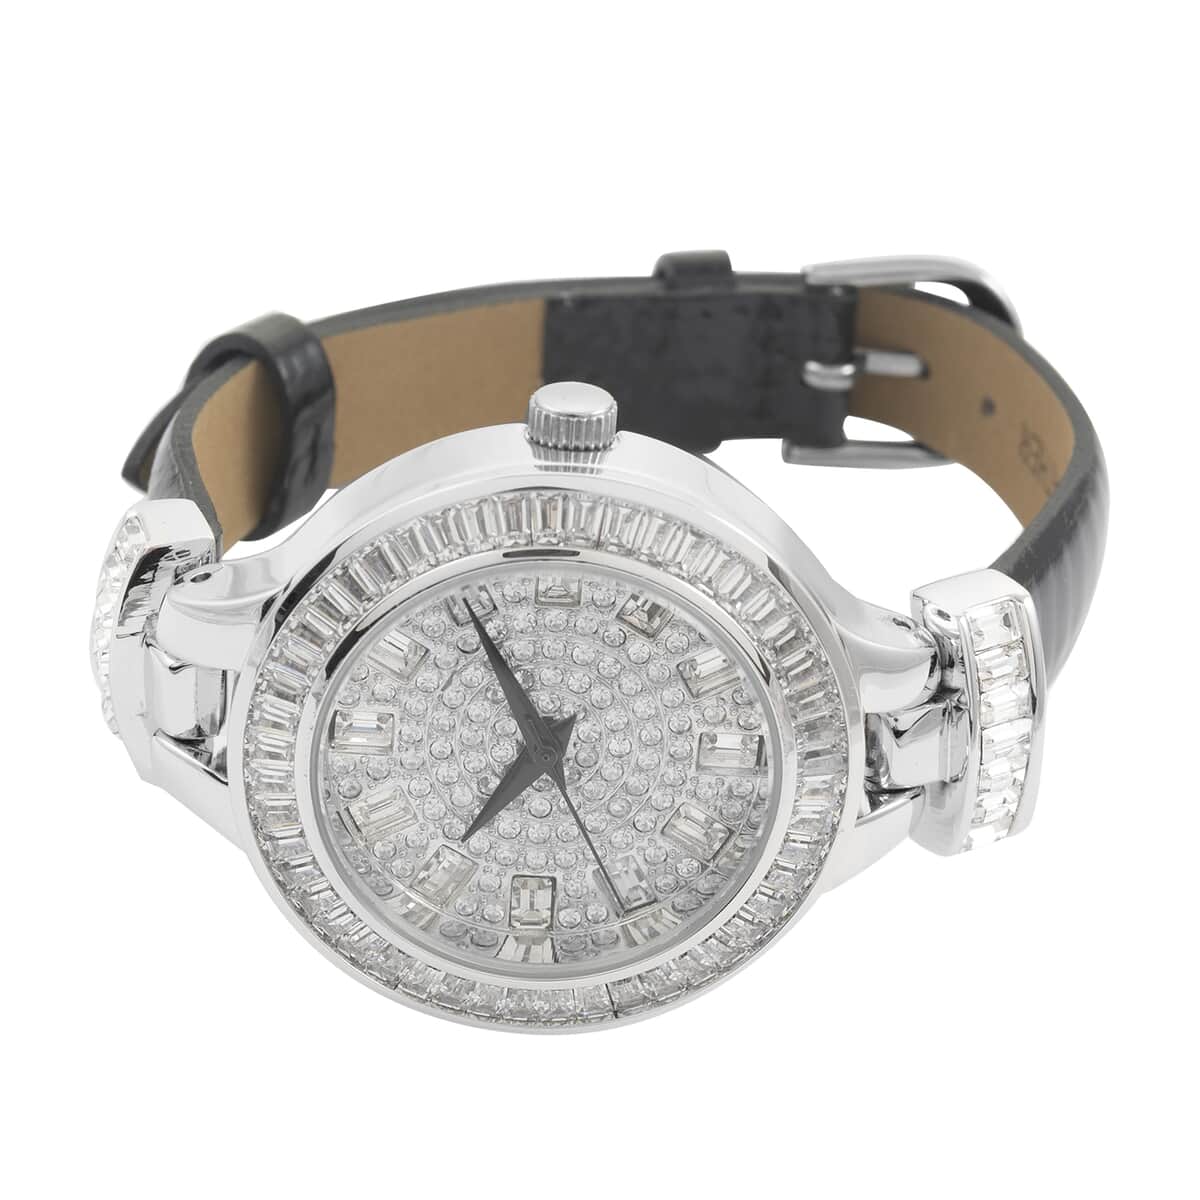 ADEE KAYE Austrian Crystal Japanese Movement Watch in Silvertone and Black Leather Strap (33 mm) image number 3